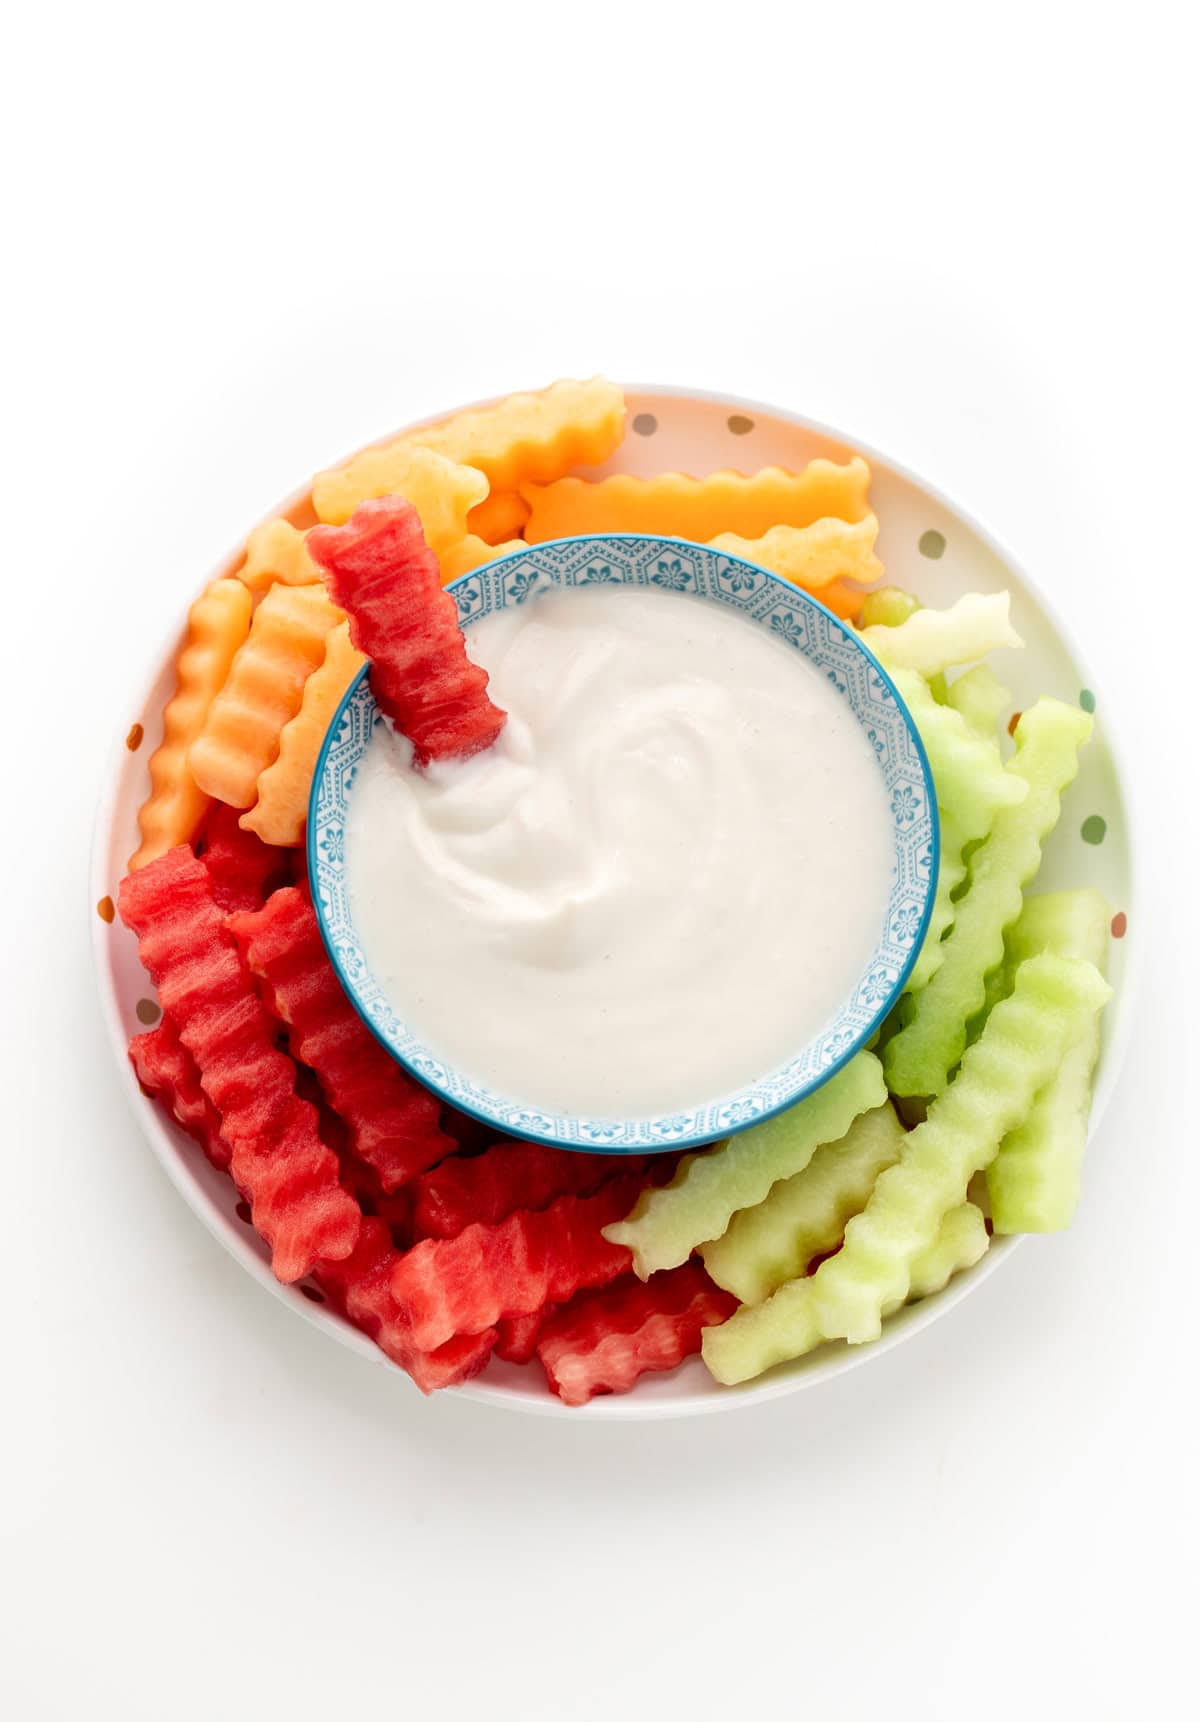 Fruit fries on a plate with a bowl of yogurt dip in the middle.